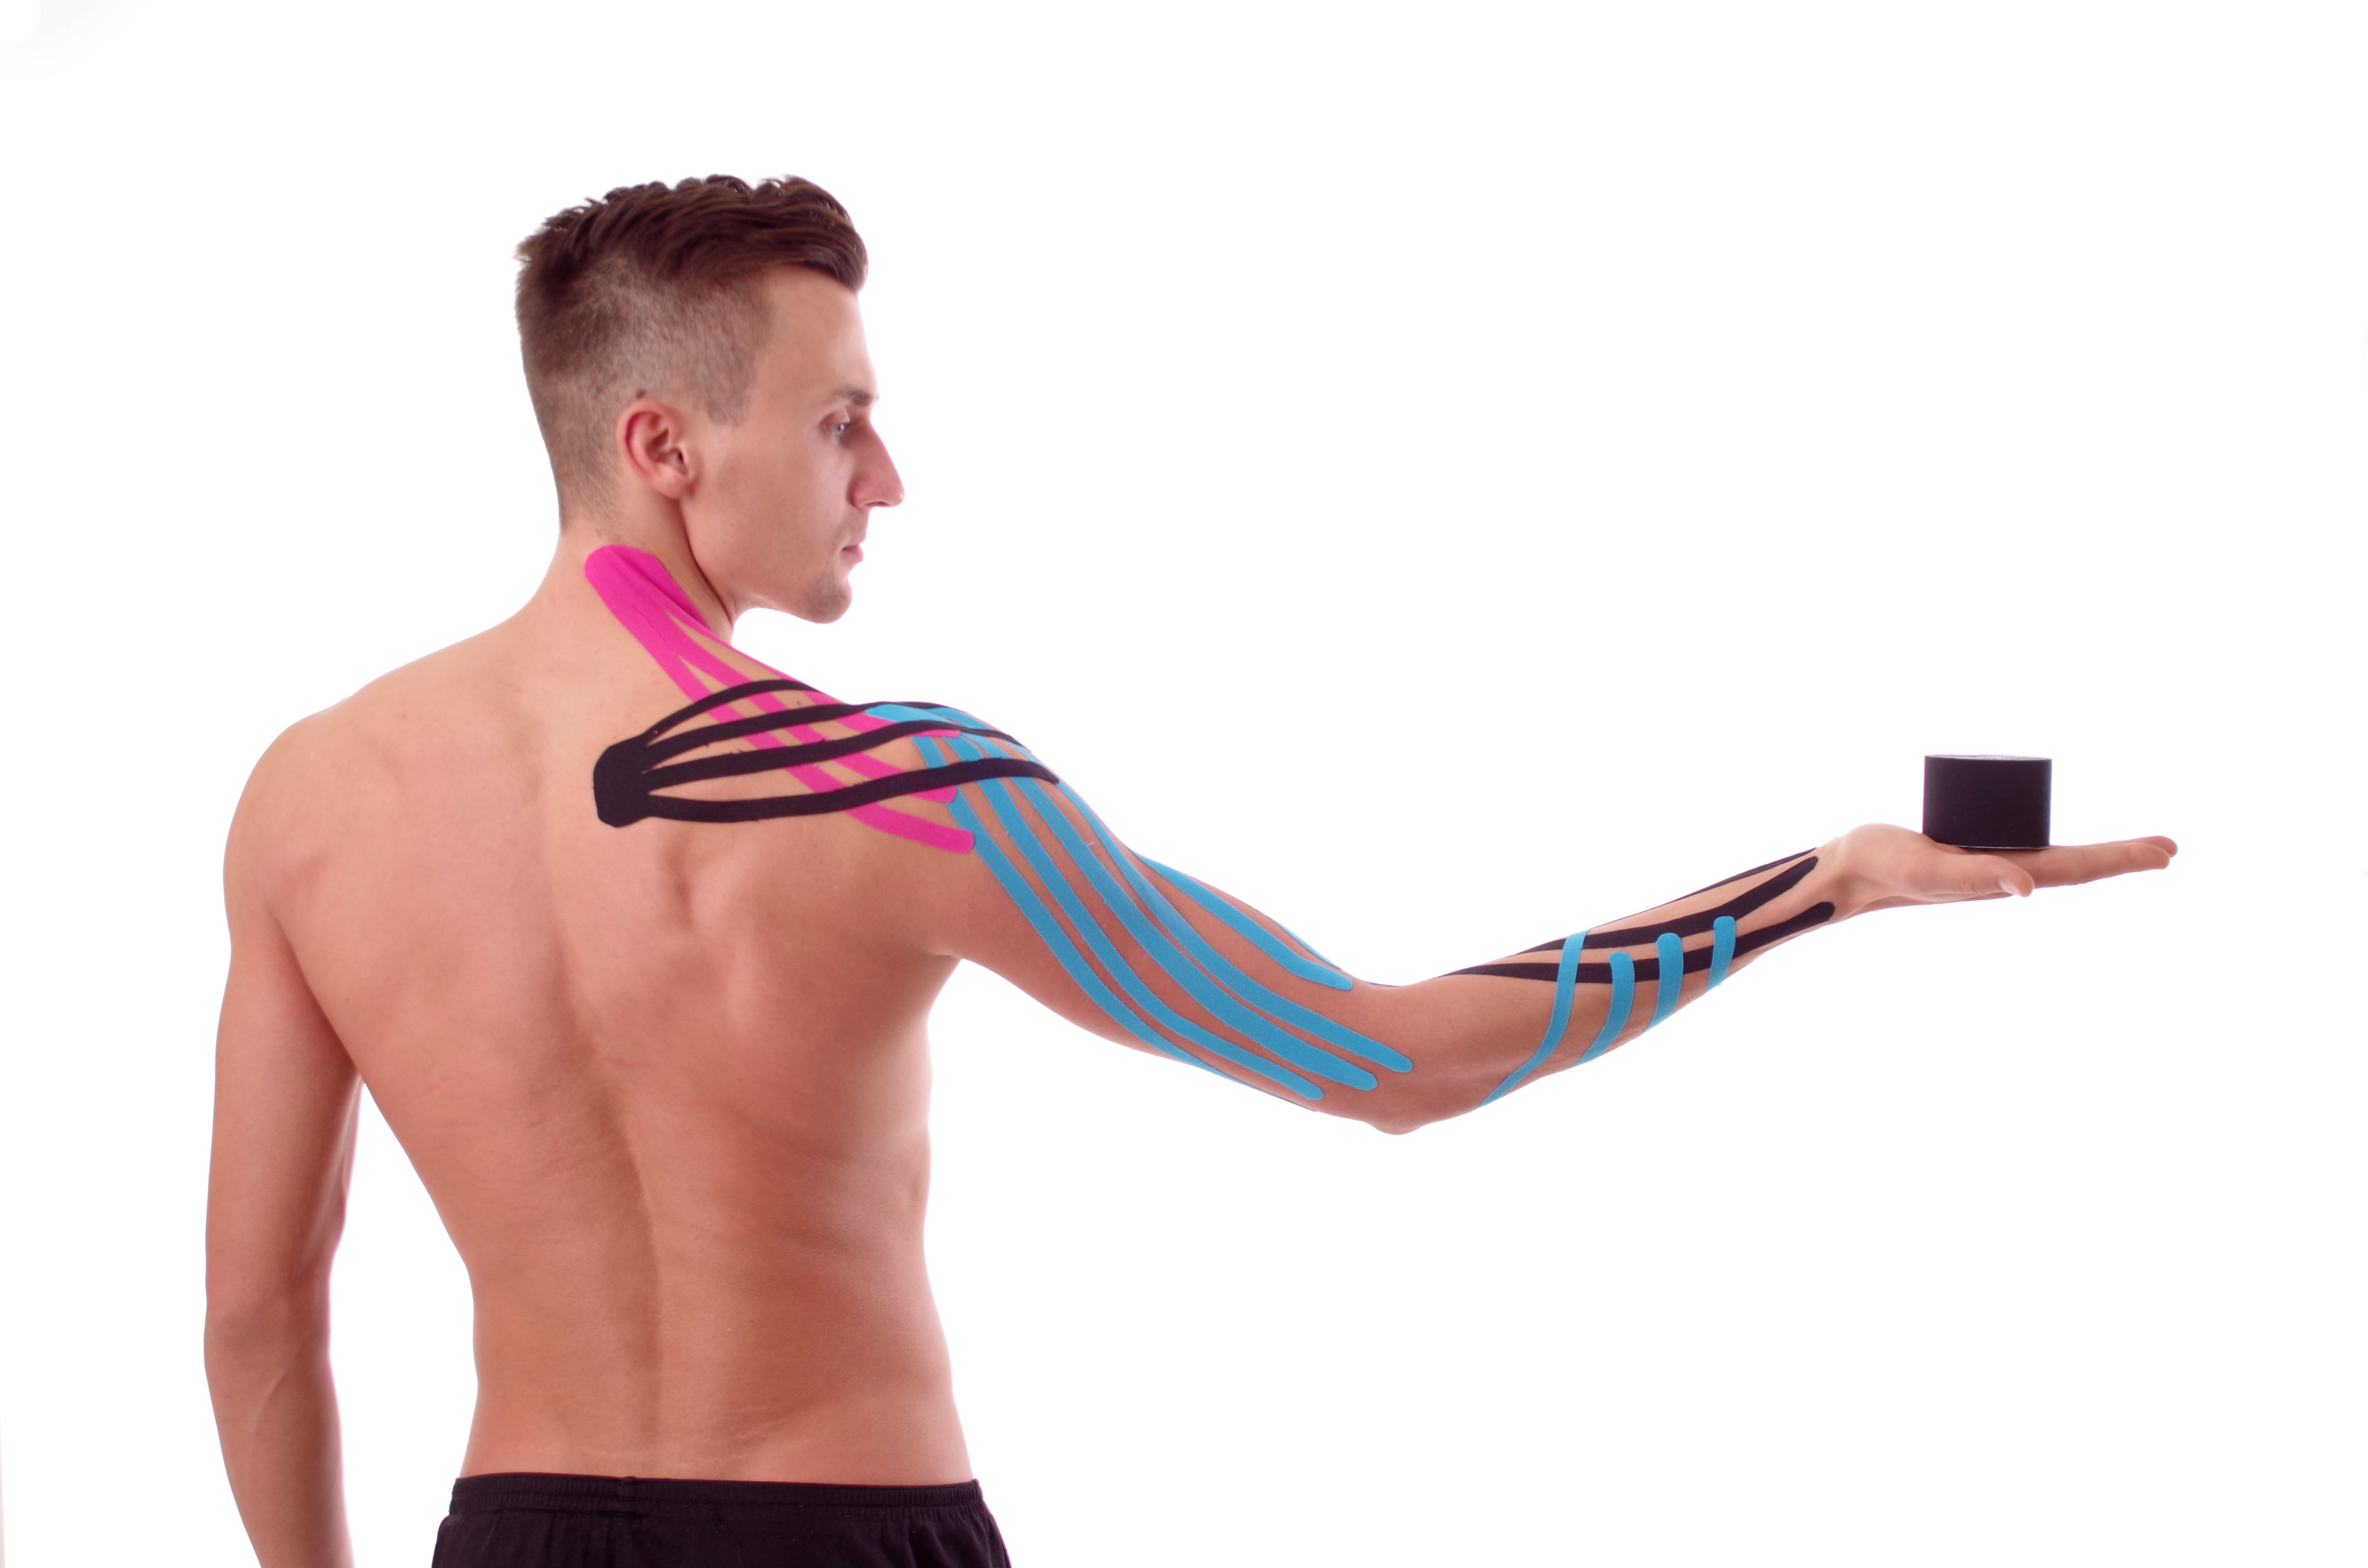 Certified Kinesio Taping Practitioner - Kinesio Tape Physical Therapy